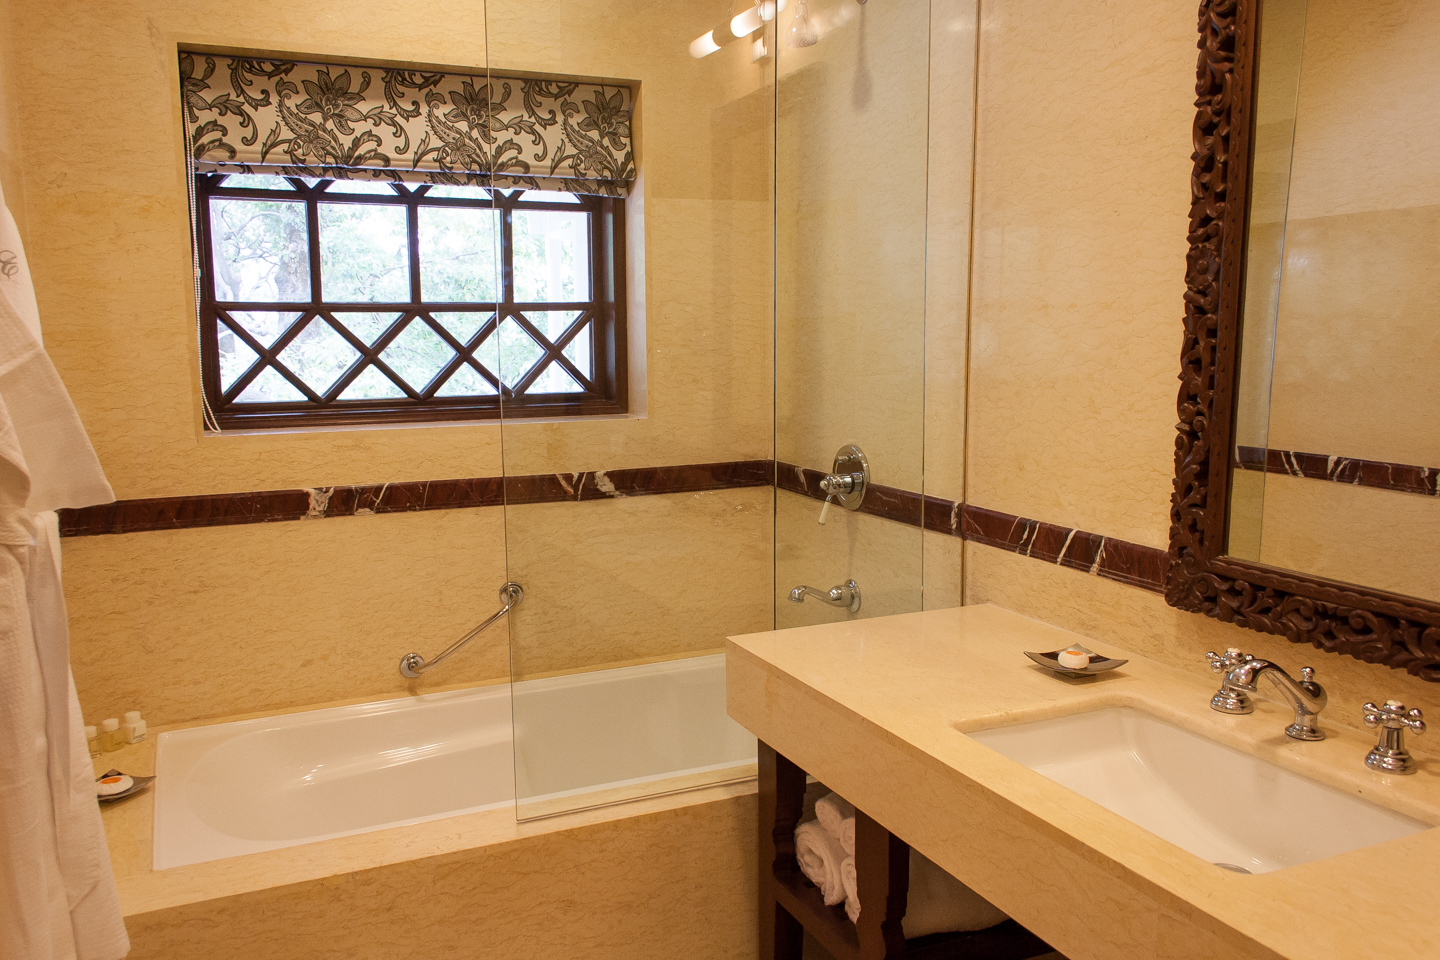 The marble walls are highlighted with trim of carved red marble. The tub has a sliding glass screen.